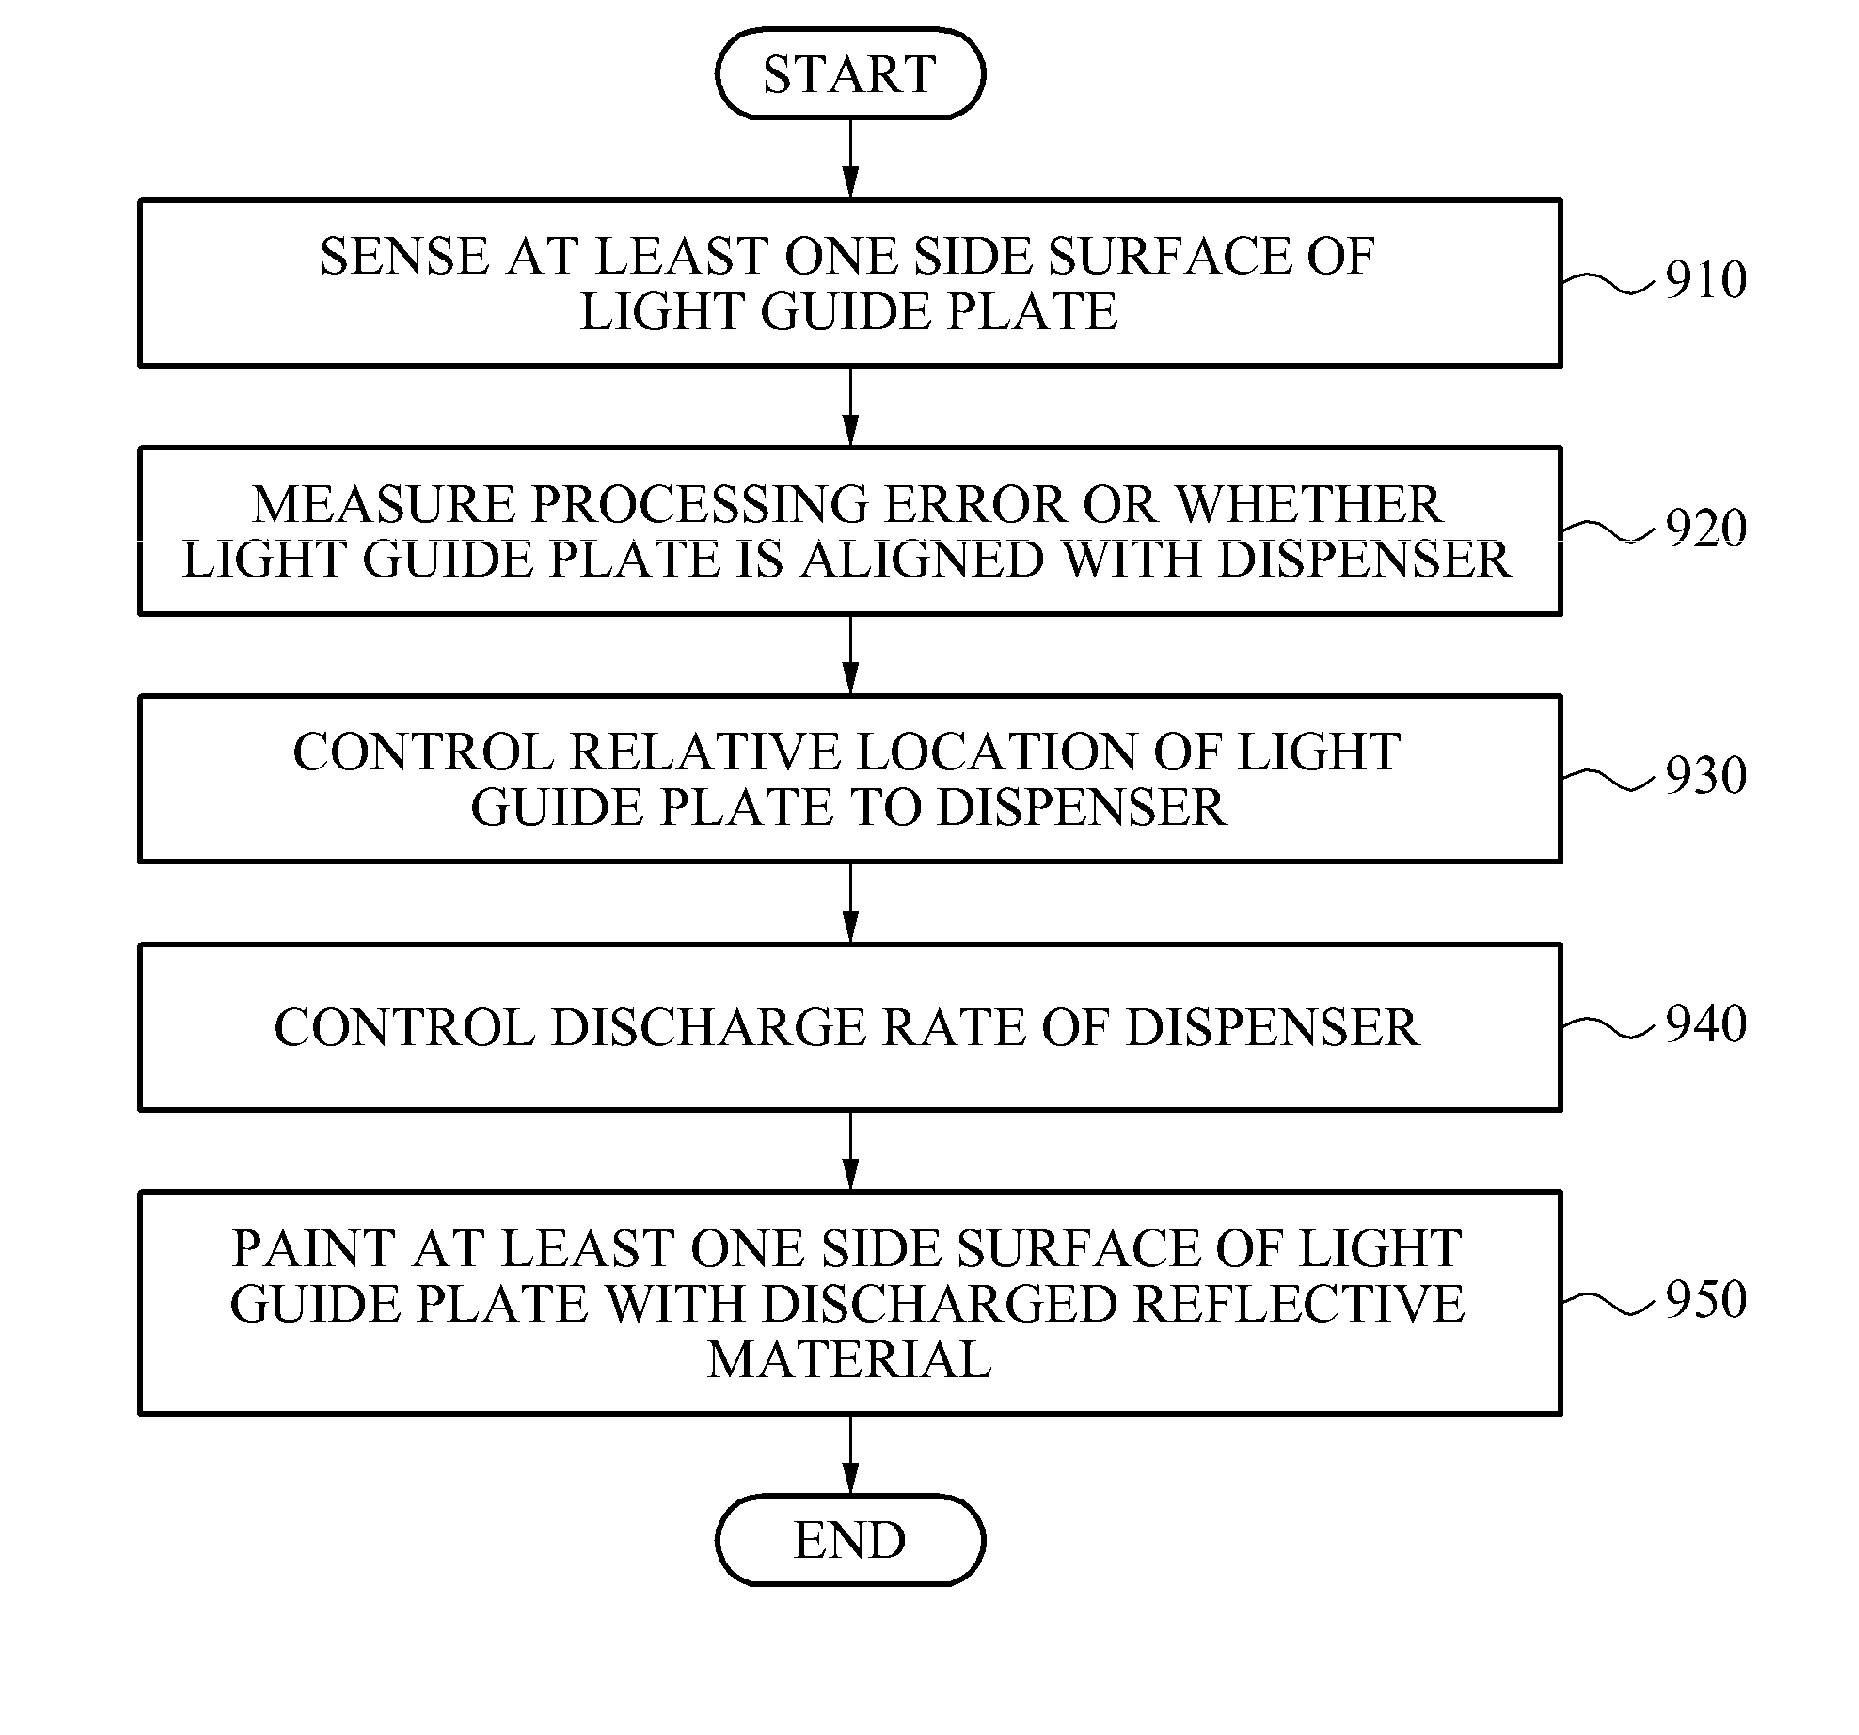 Method and apparatus for preventing light leakage from light guide plate and display device having light guide plate painted with reflective material